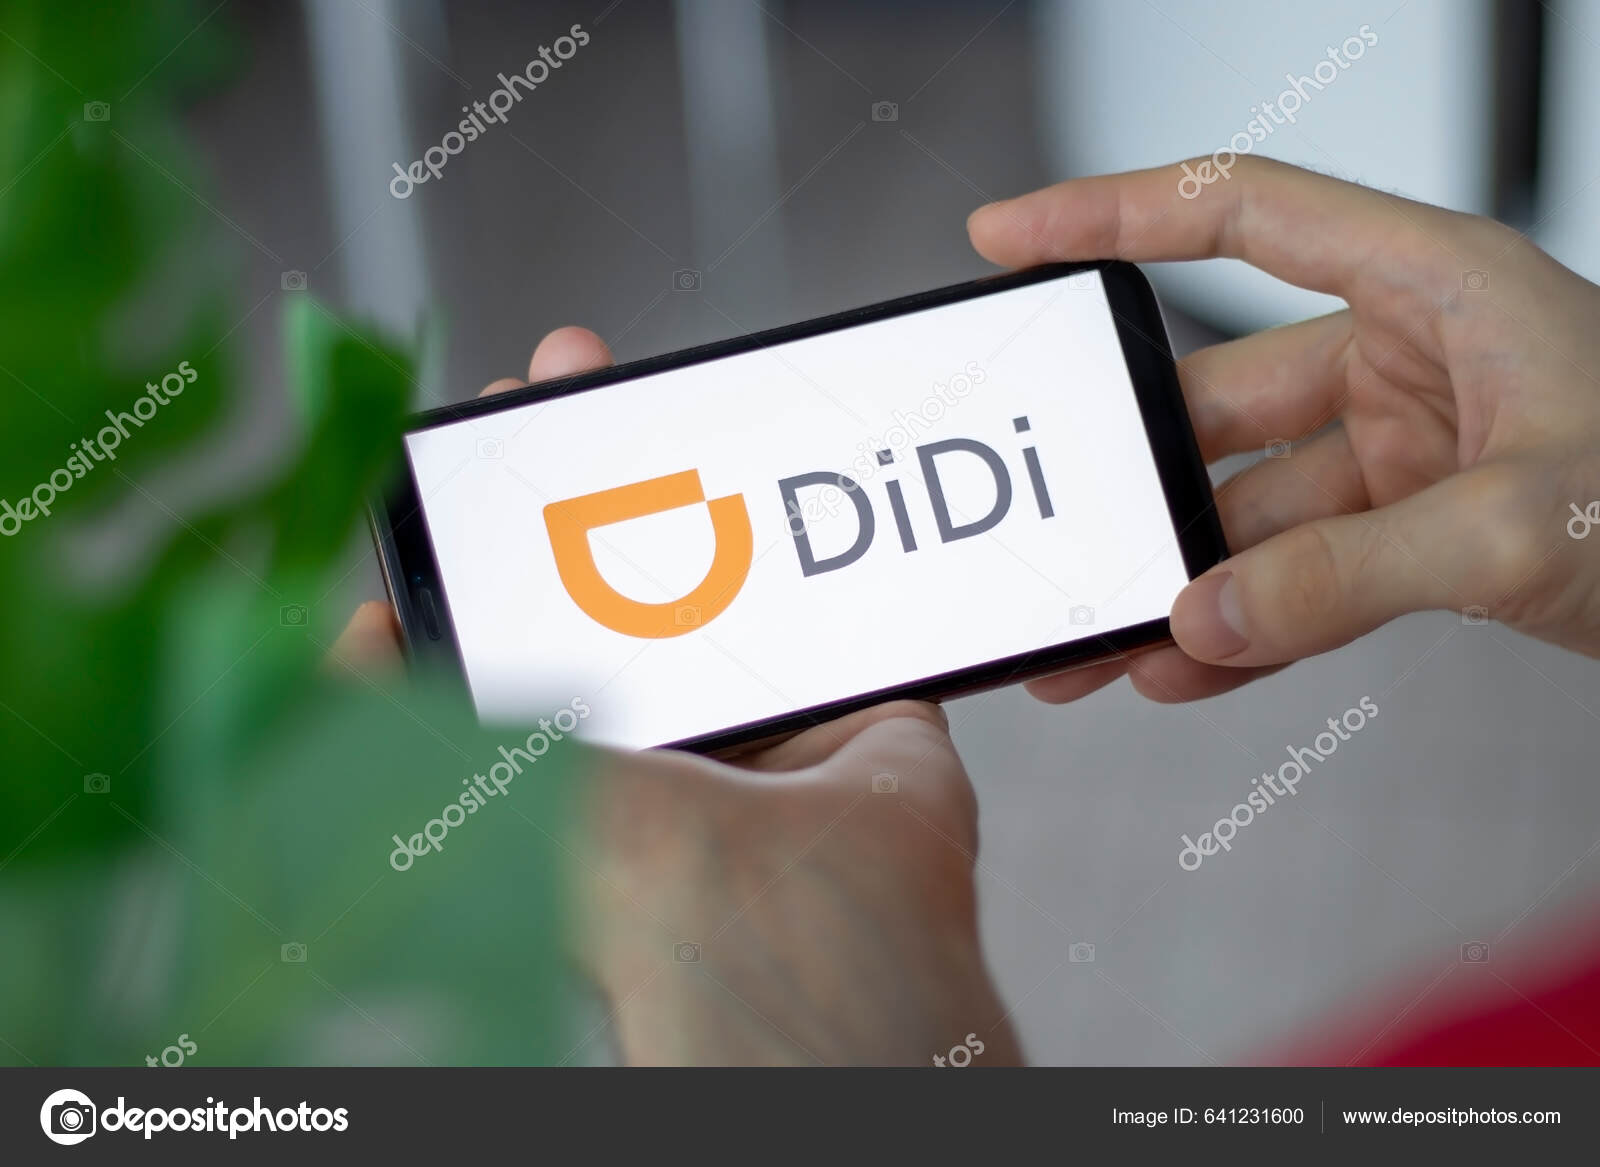 Ride service Didi taken down from China app stores | Phnom Penh Post